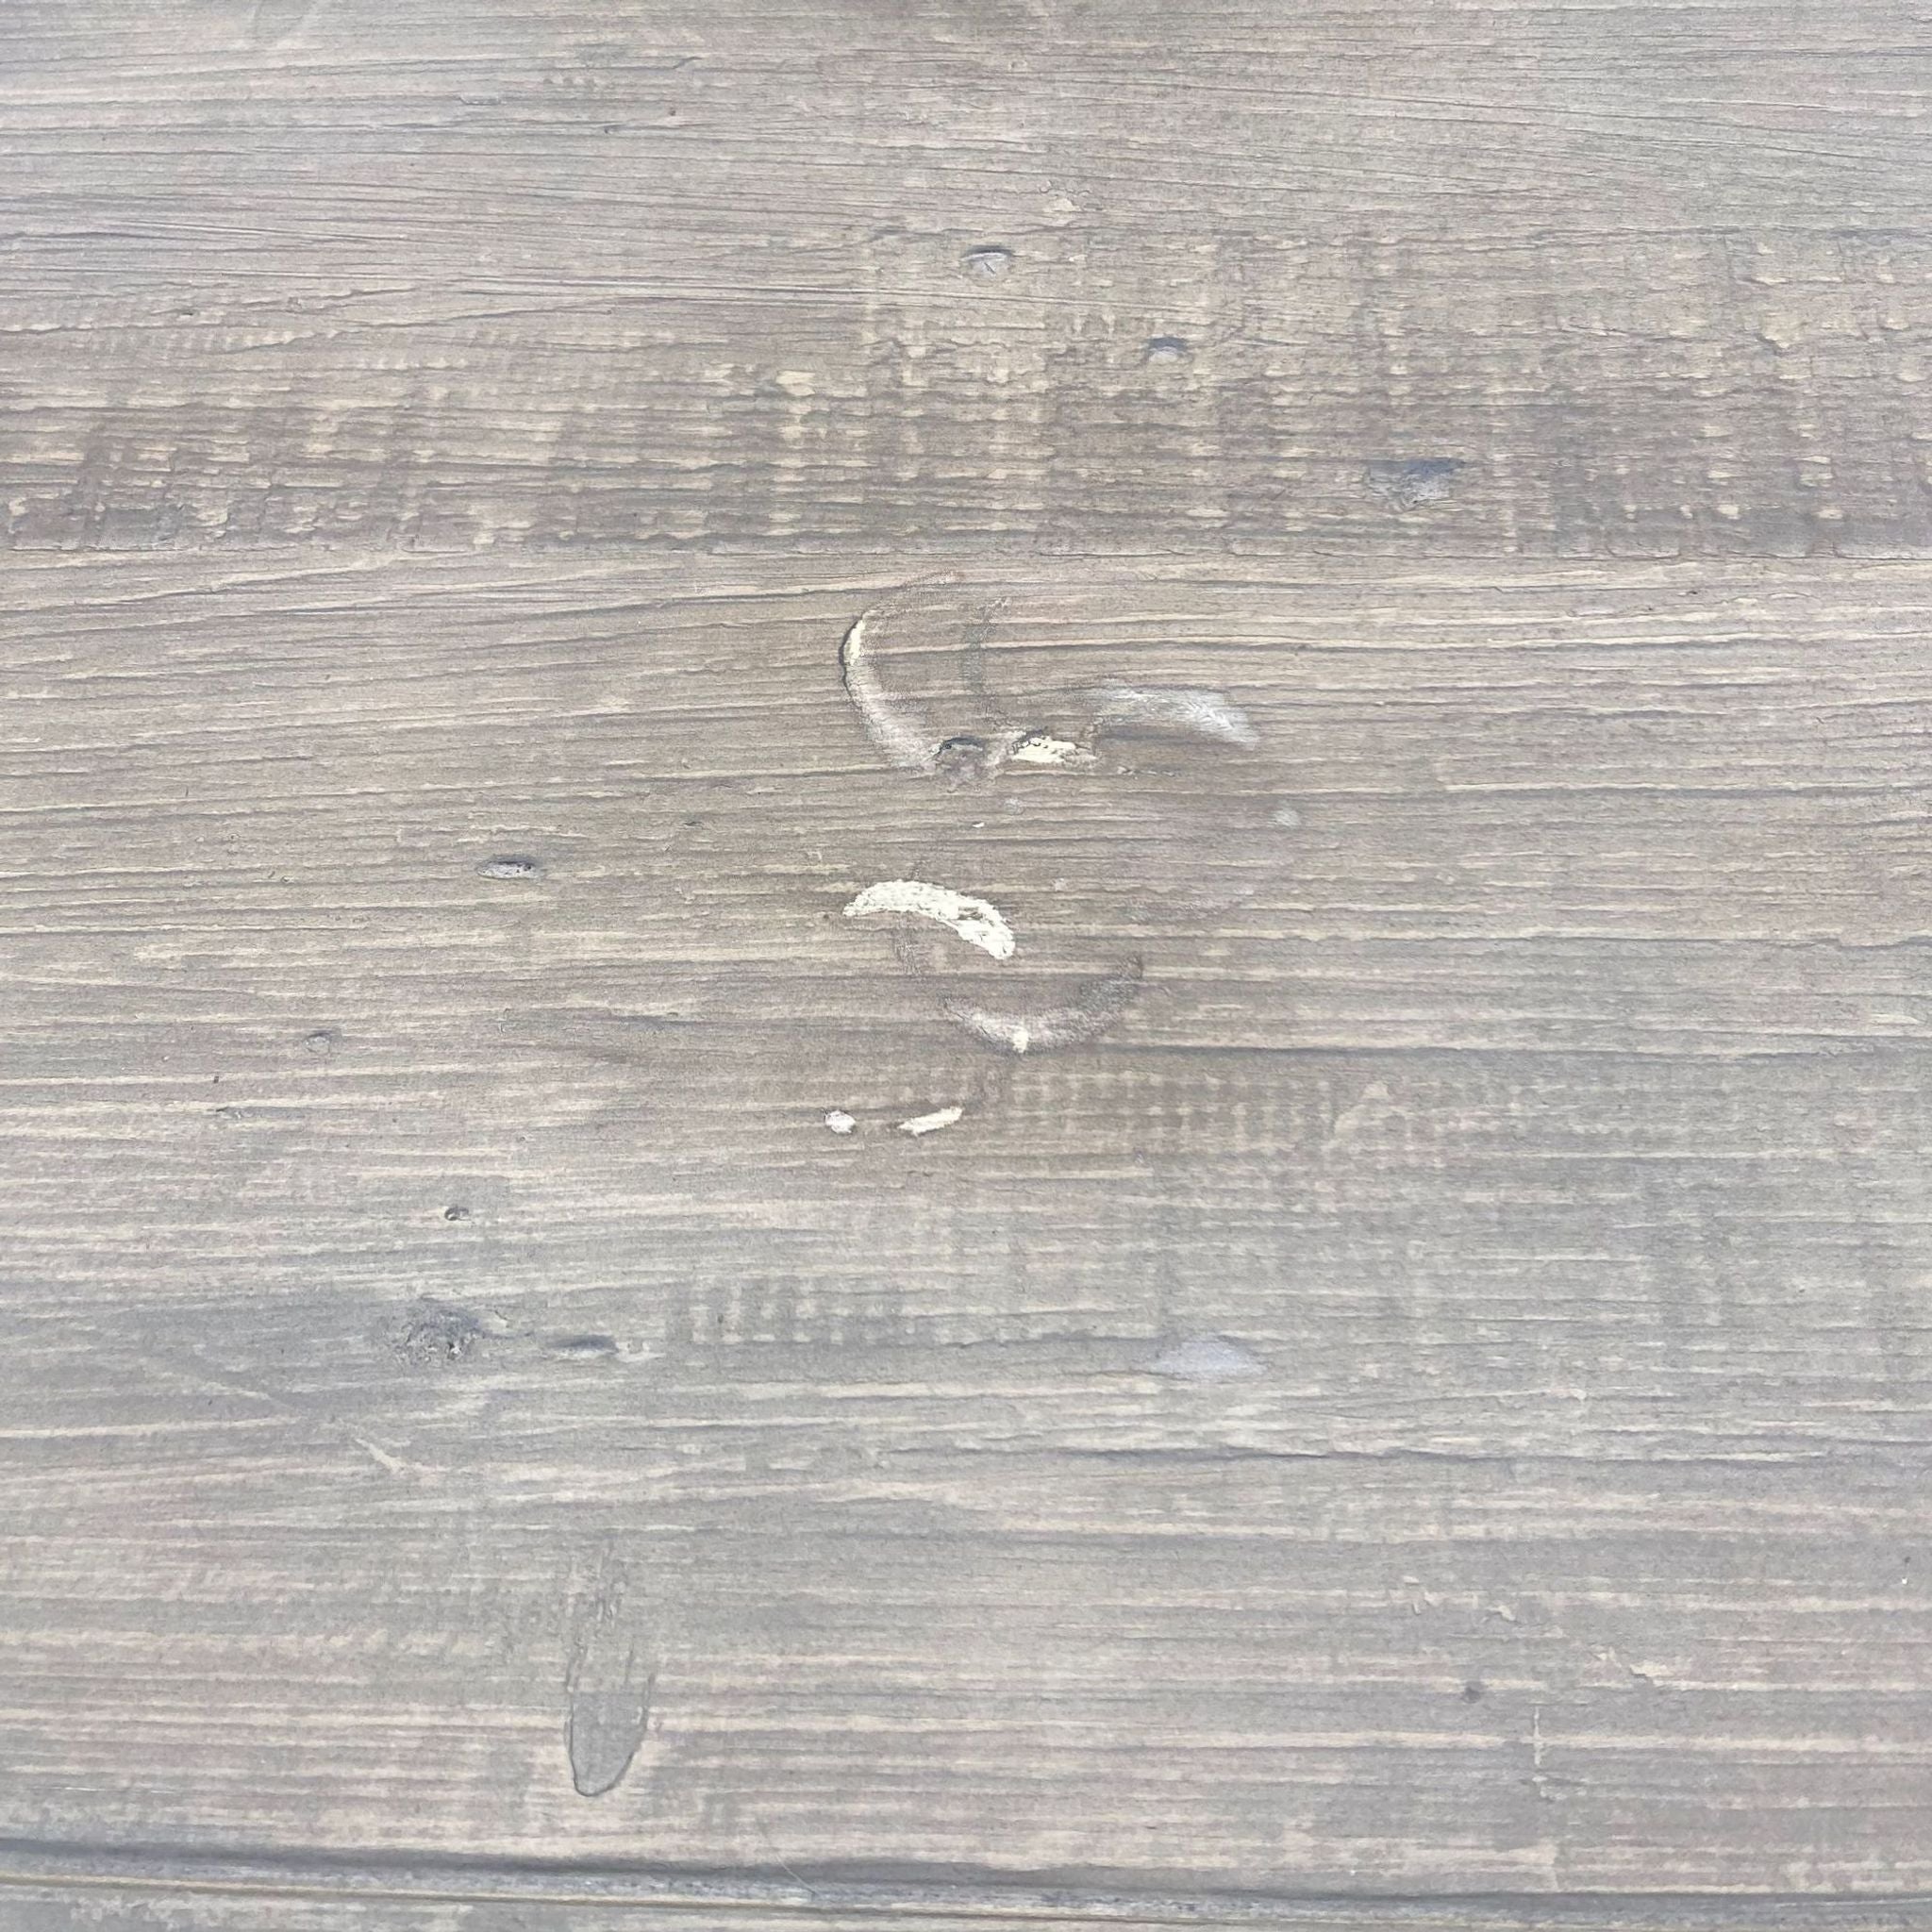 Close-up of the wooden tabletop with a noticeable white scuff mark, showing signs of wear.